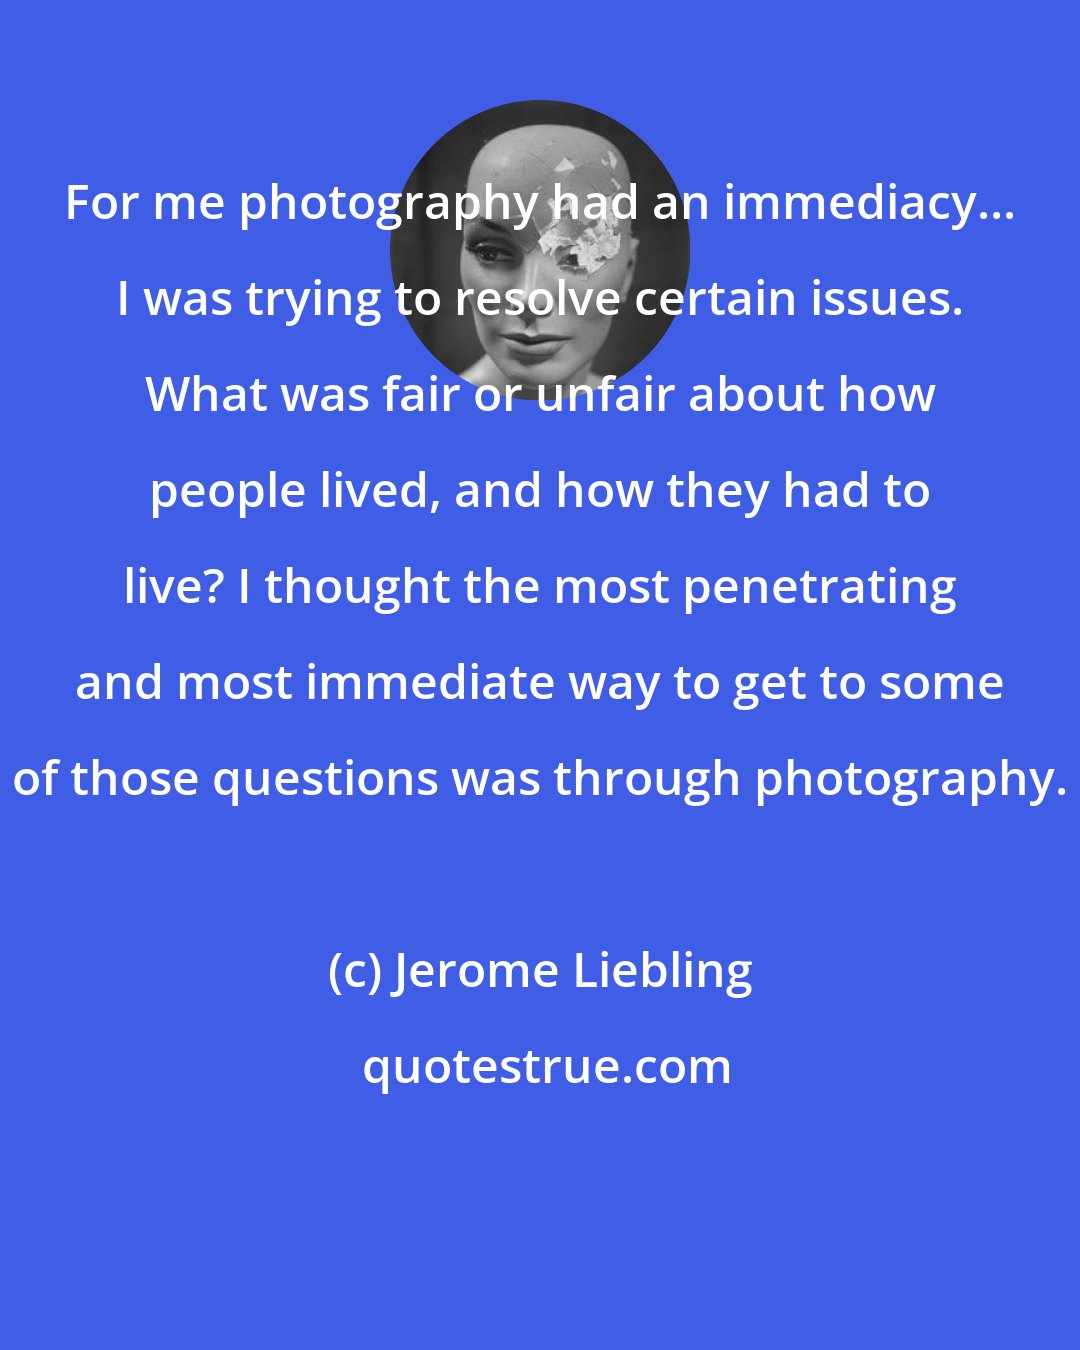 Jerome Liebling: For me photography had an immediacy... I was trying to resolve certain issues. What was fair or unfair about how people lived, and how they had to live? I thought the most penetrating and most immediate way to get to some of those questions was through photography.